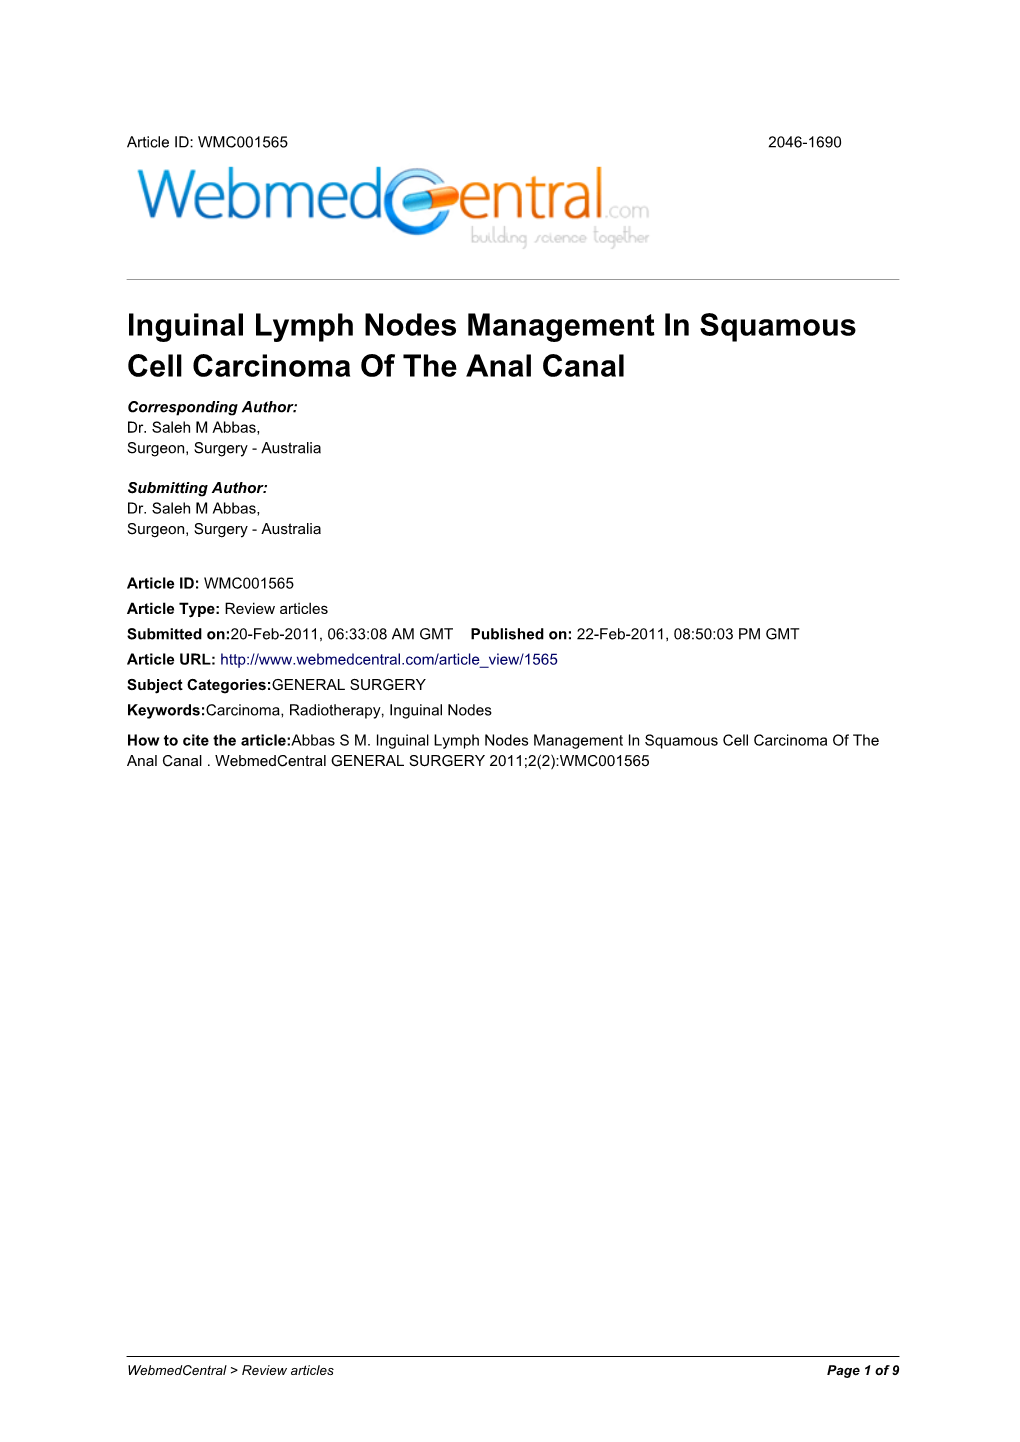 Inguinal Lymph Nodes Management in Squamous Cell Carcinoma of the Anal Canal